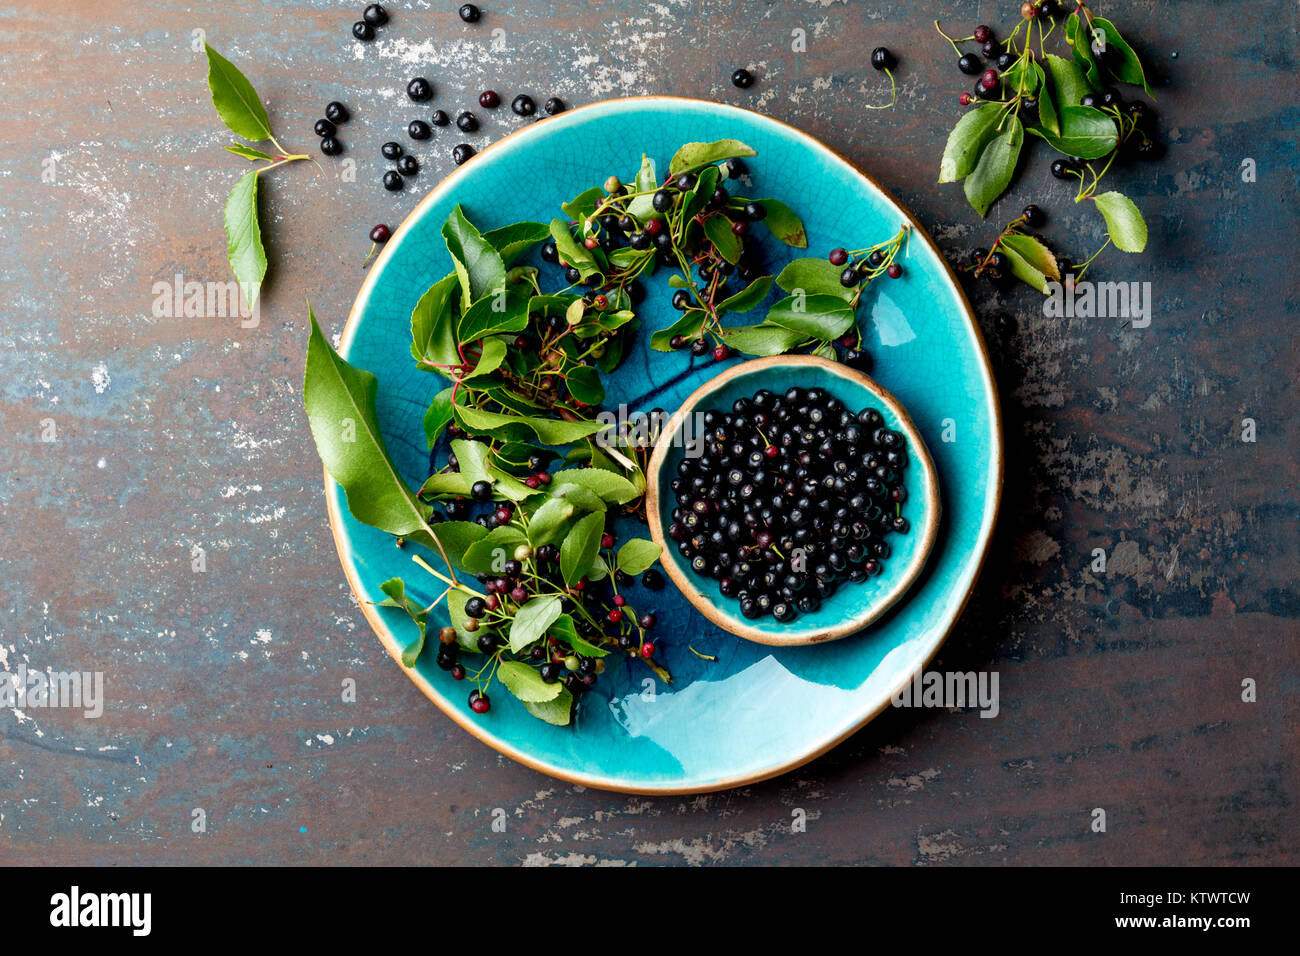 Superfood MAQUI BERRY. Superfoods antioxidant of indian mapuche, Chile. Bowl of fresh maqui berry and maqui berry tree branch on metal background, top Stock Photo